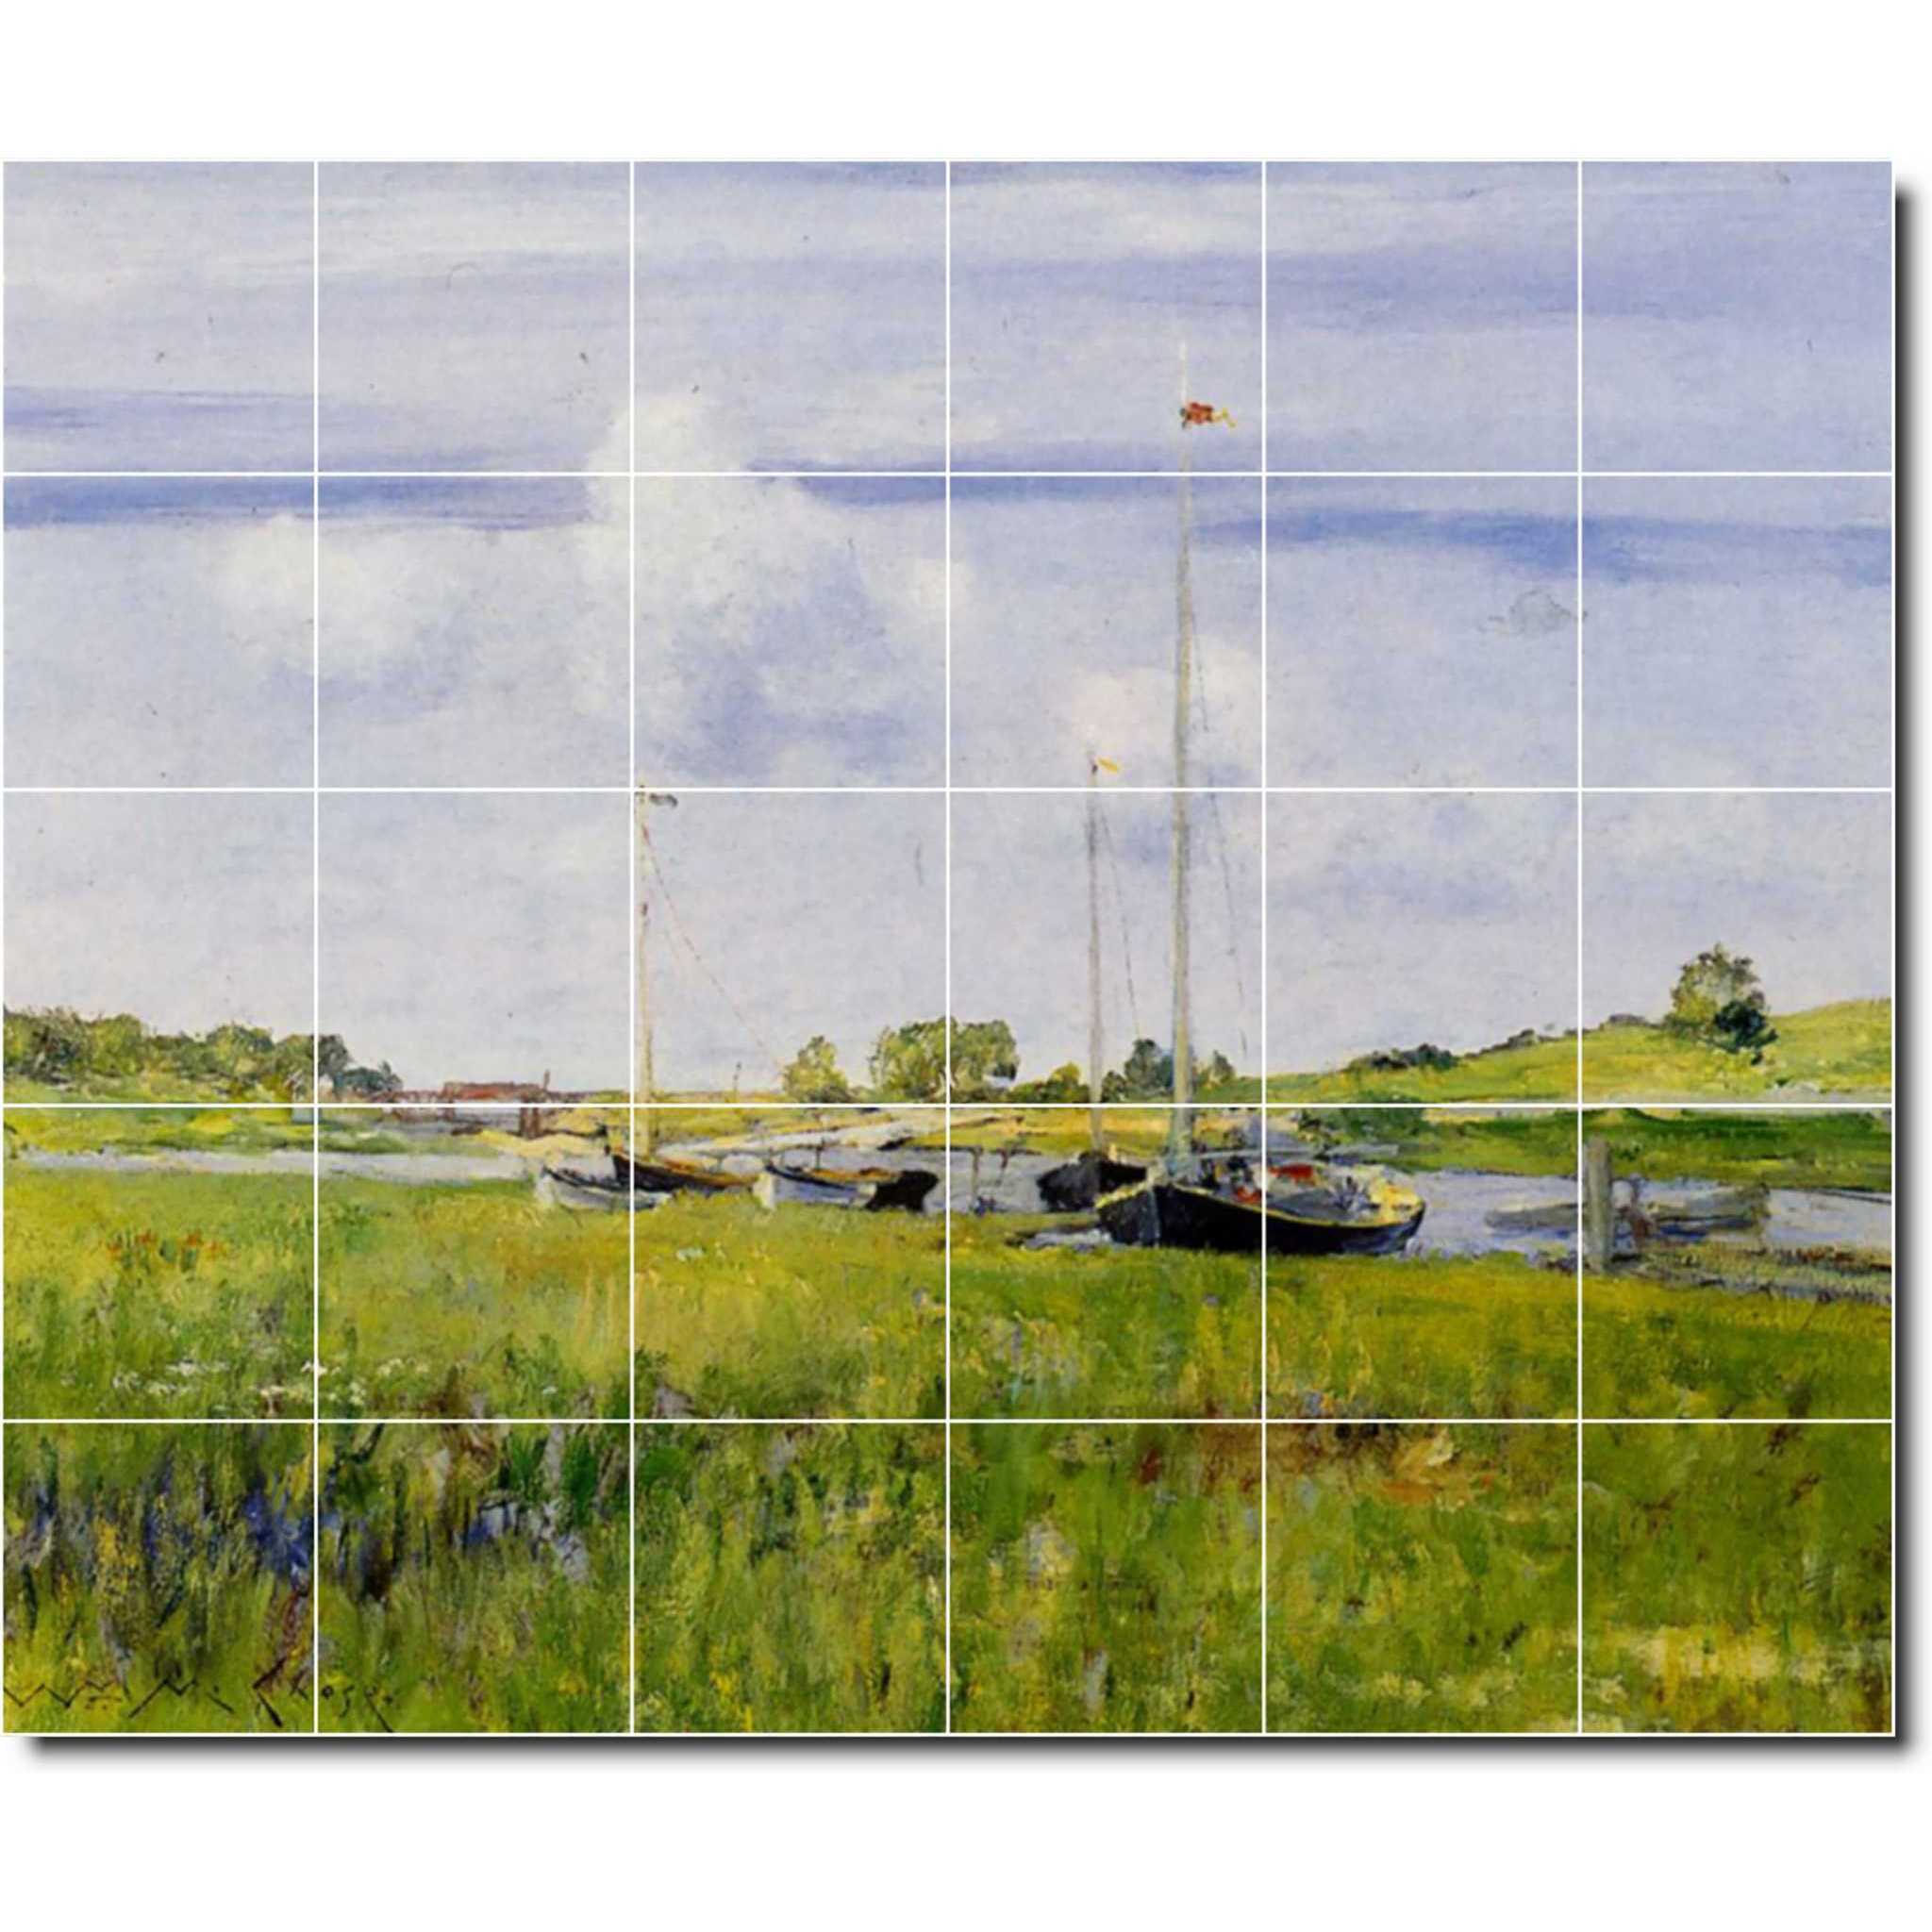 william chase country painting ceramic tile mural p01489